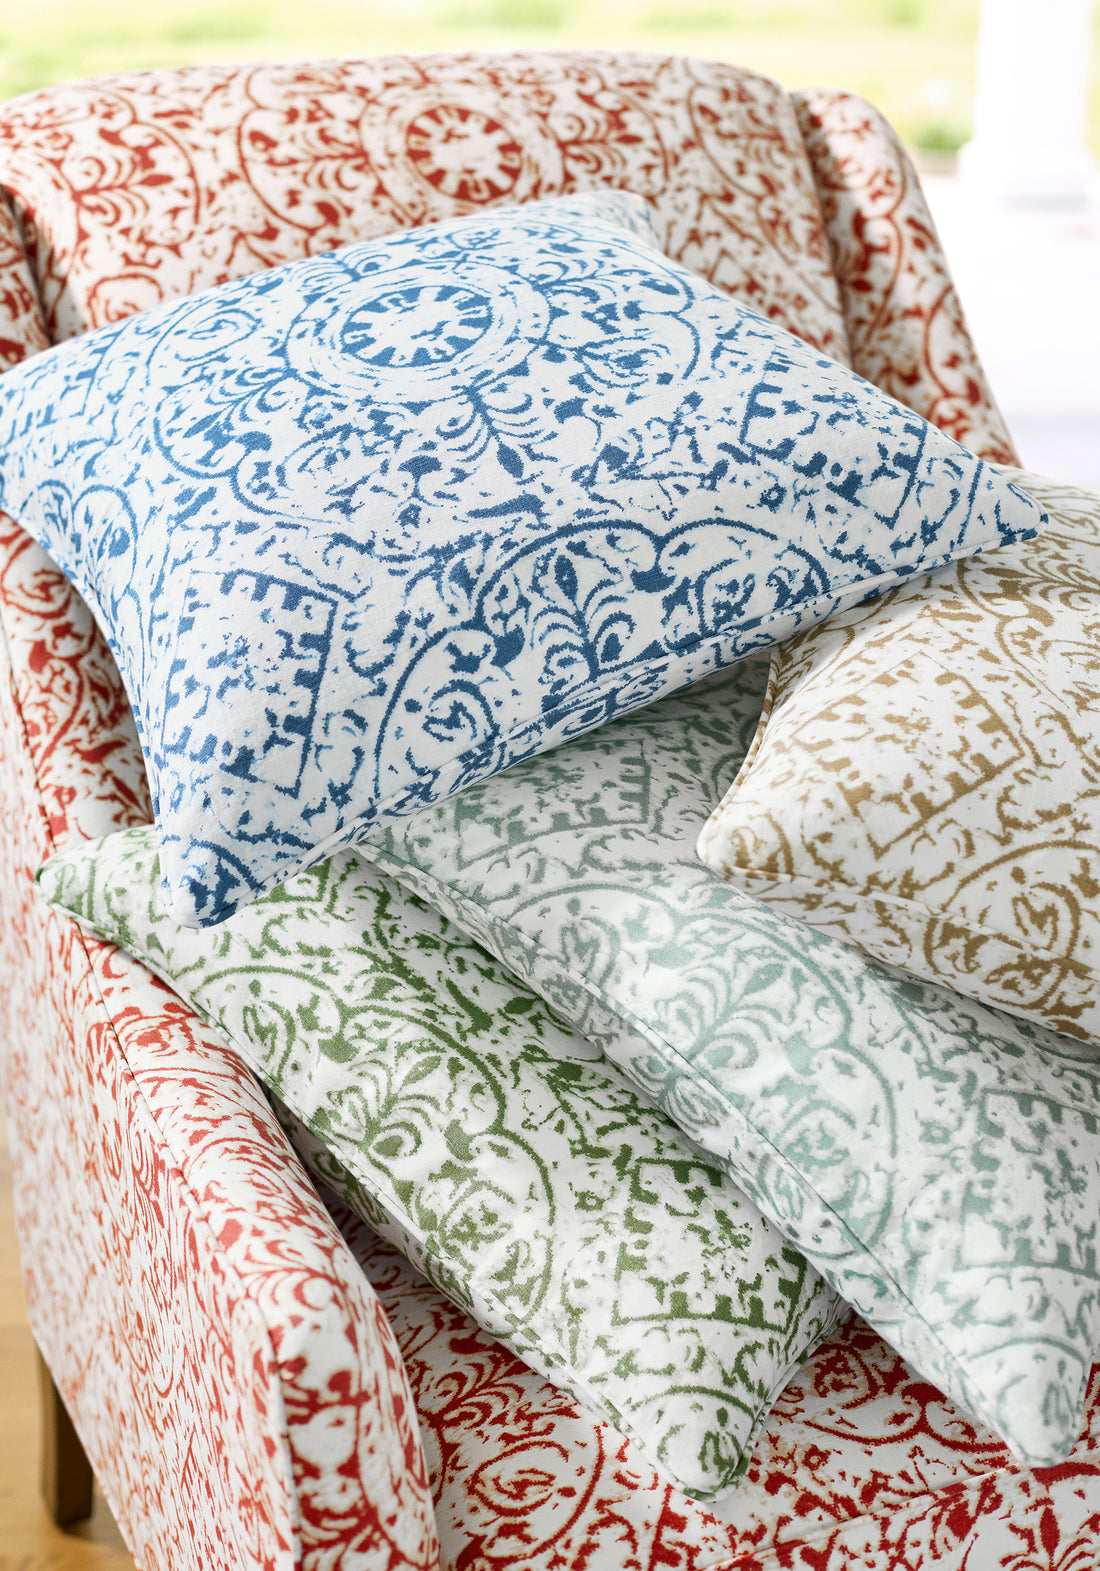 Pillows featuring Havana fabric in seaglass color - pattern number F981310 - by Thibaut in the Montecito collection